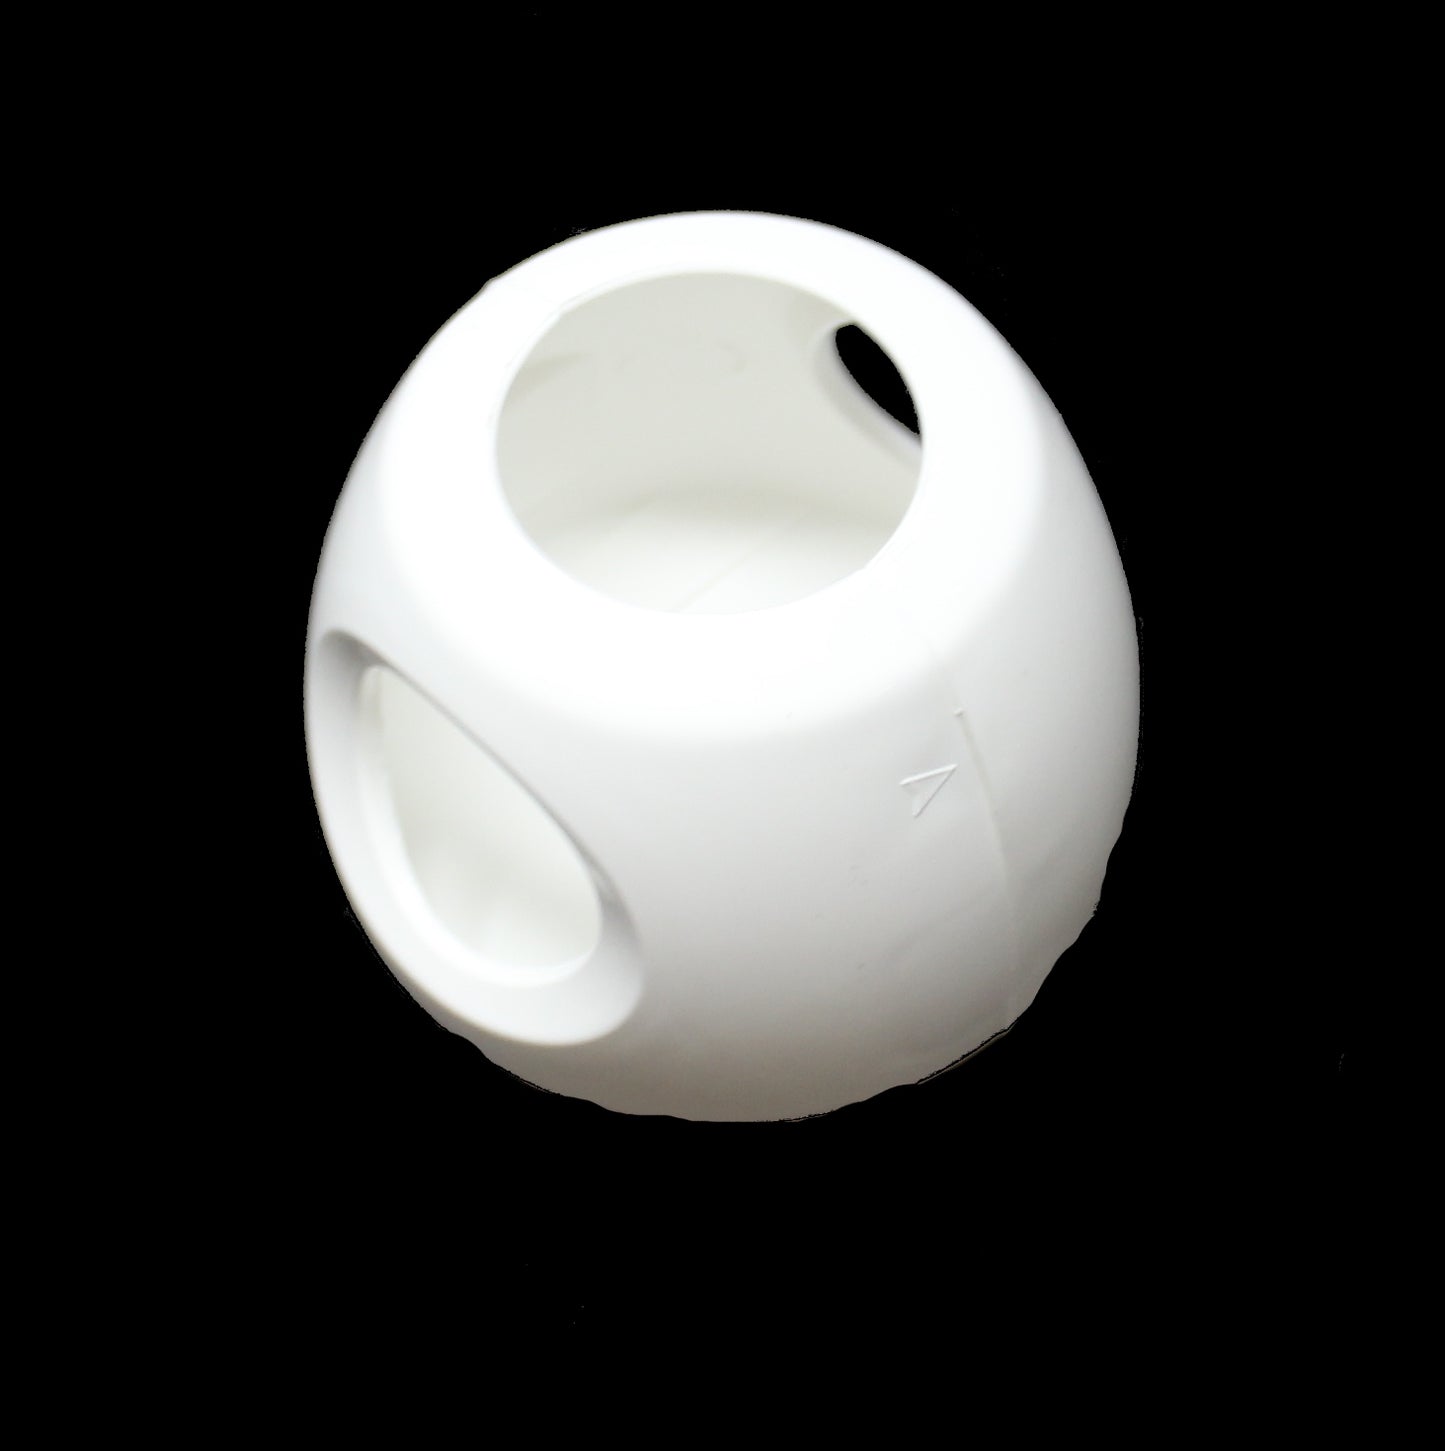 White Safety Doorknob Covers - Child Proof Door Knob Covers